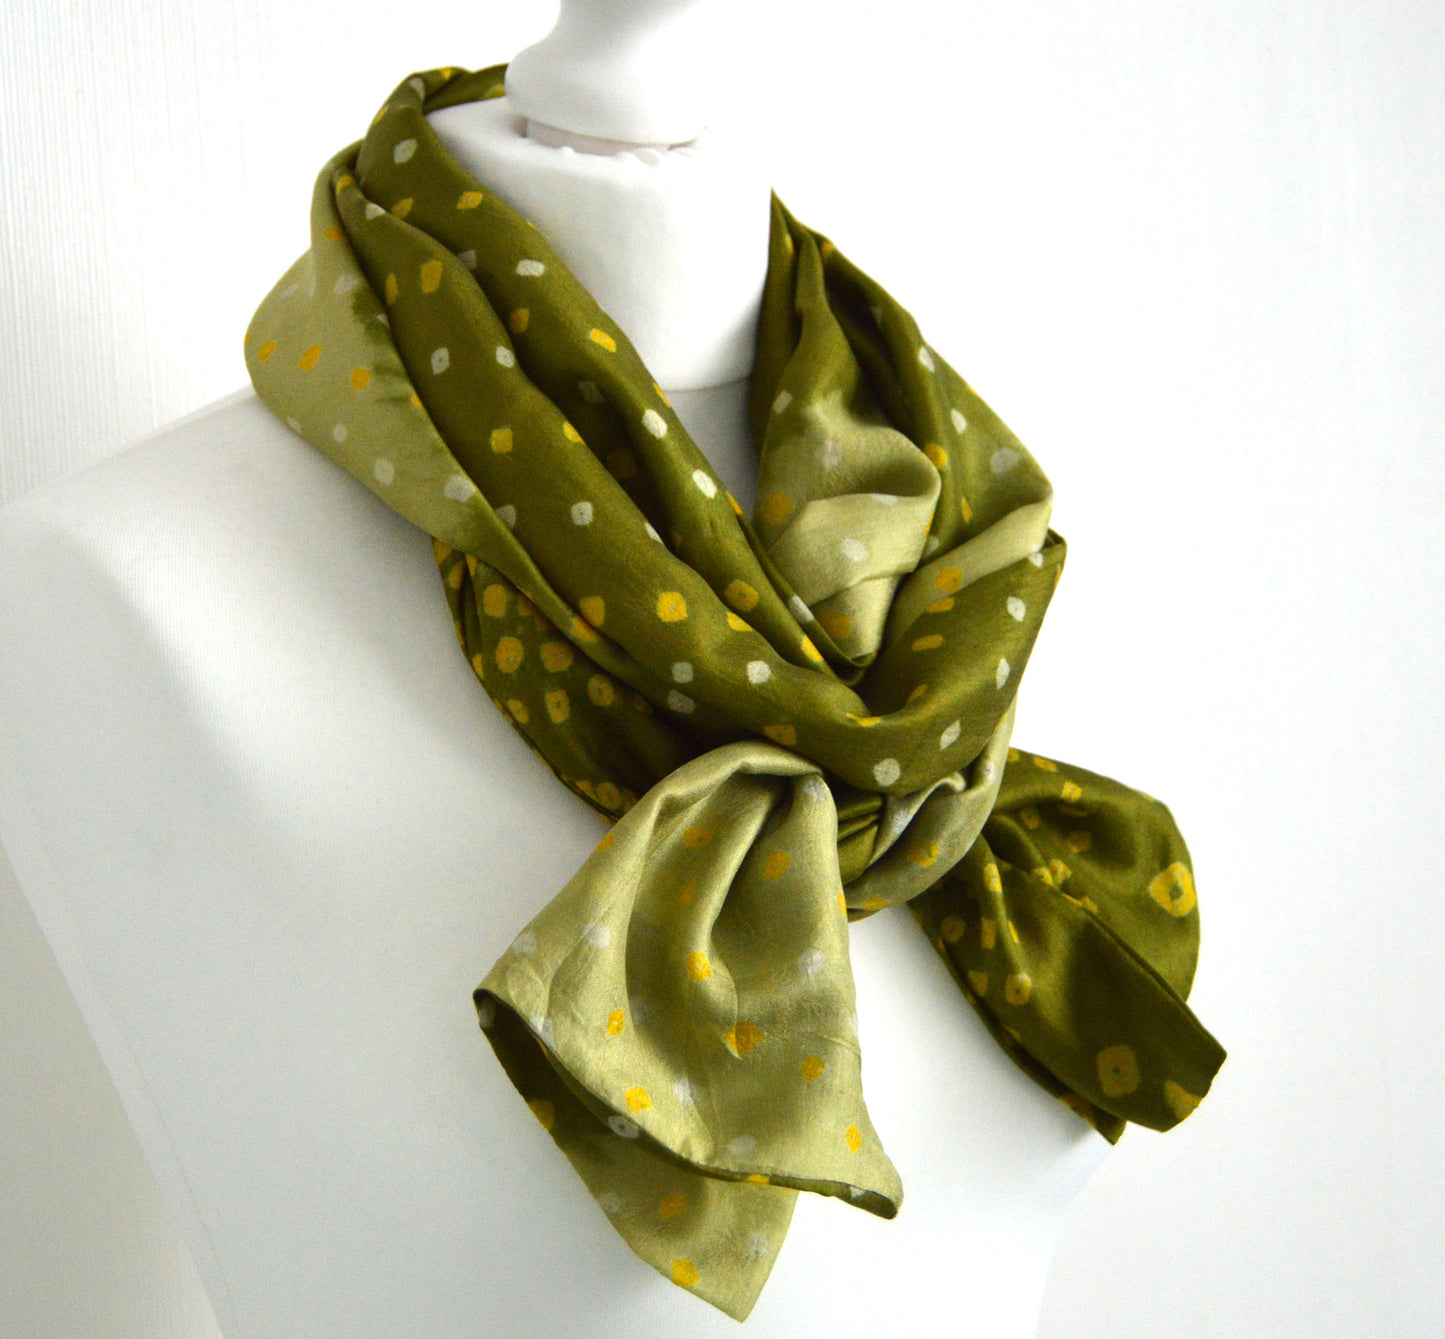 Olive Green Tie Dye upcycled Vintage Sari Silk Scarf - Hand Dyed Tie Dye Boho Scarf - Lightweight Handmade Eco Friendly Gift for Her Him